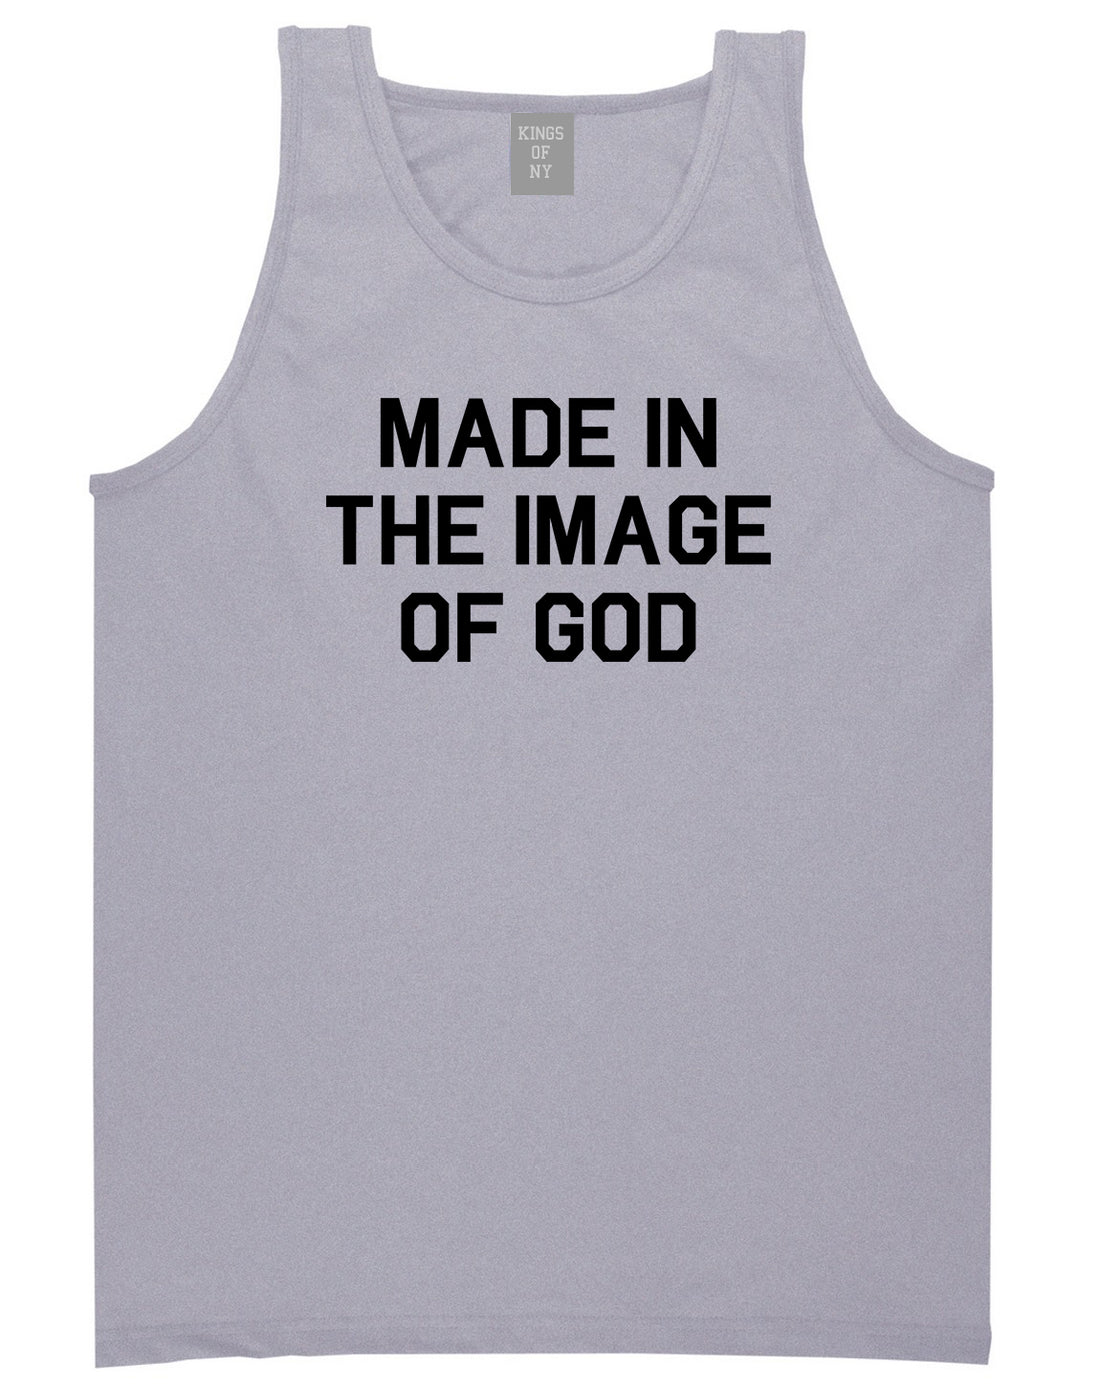 Made In The Image Of God Mens Tank Top Shirt Grey by Kings Of NY